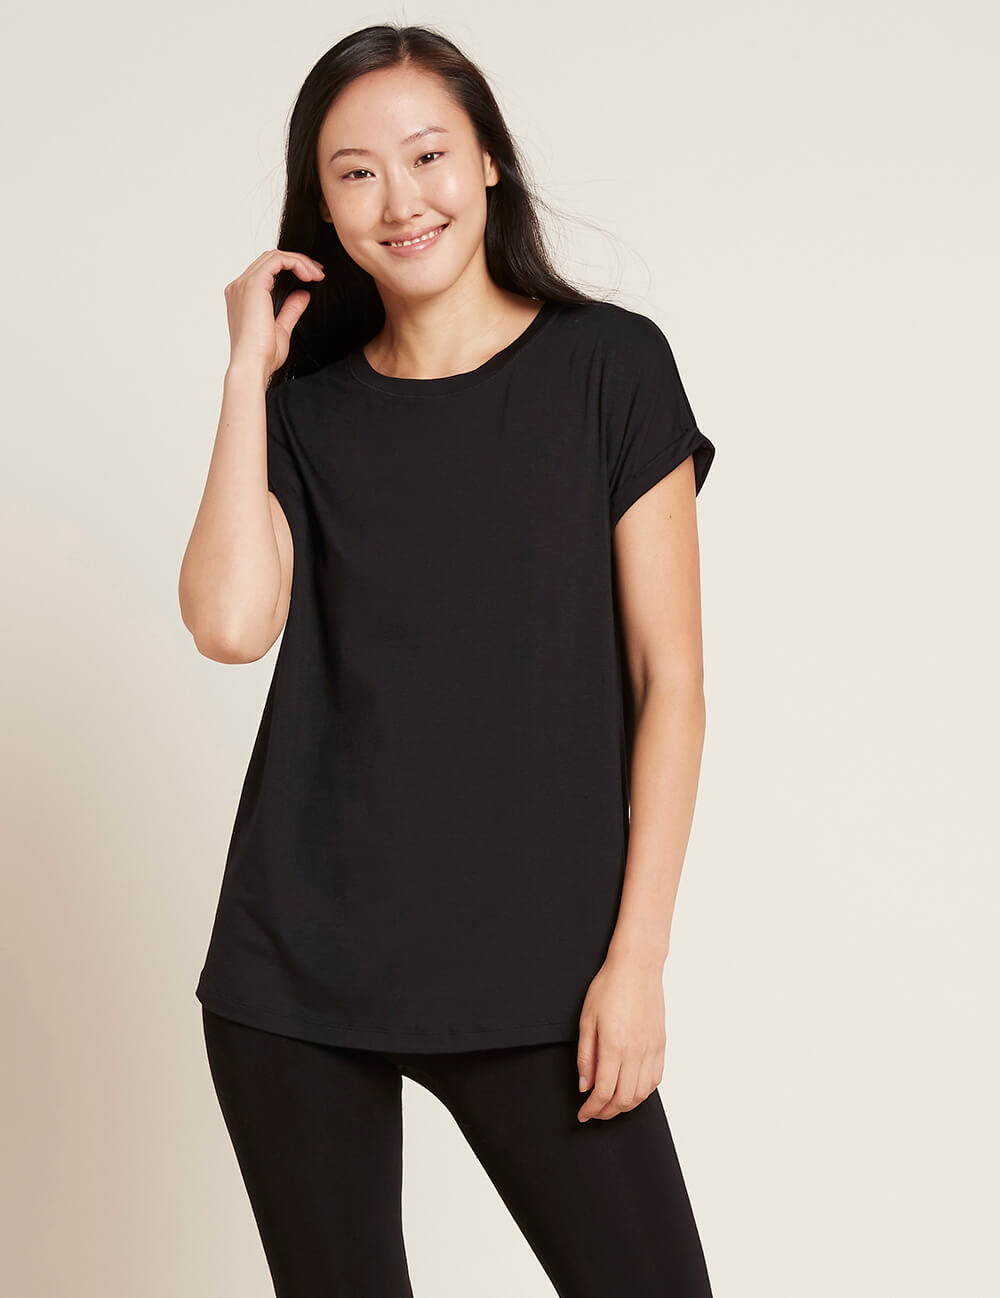 Downtime-Lounge-Top-Black-Front.jpg